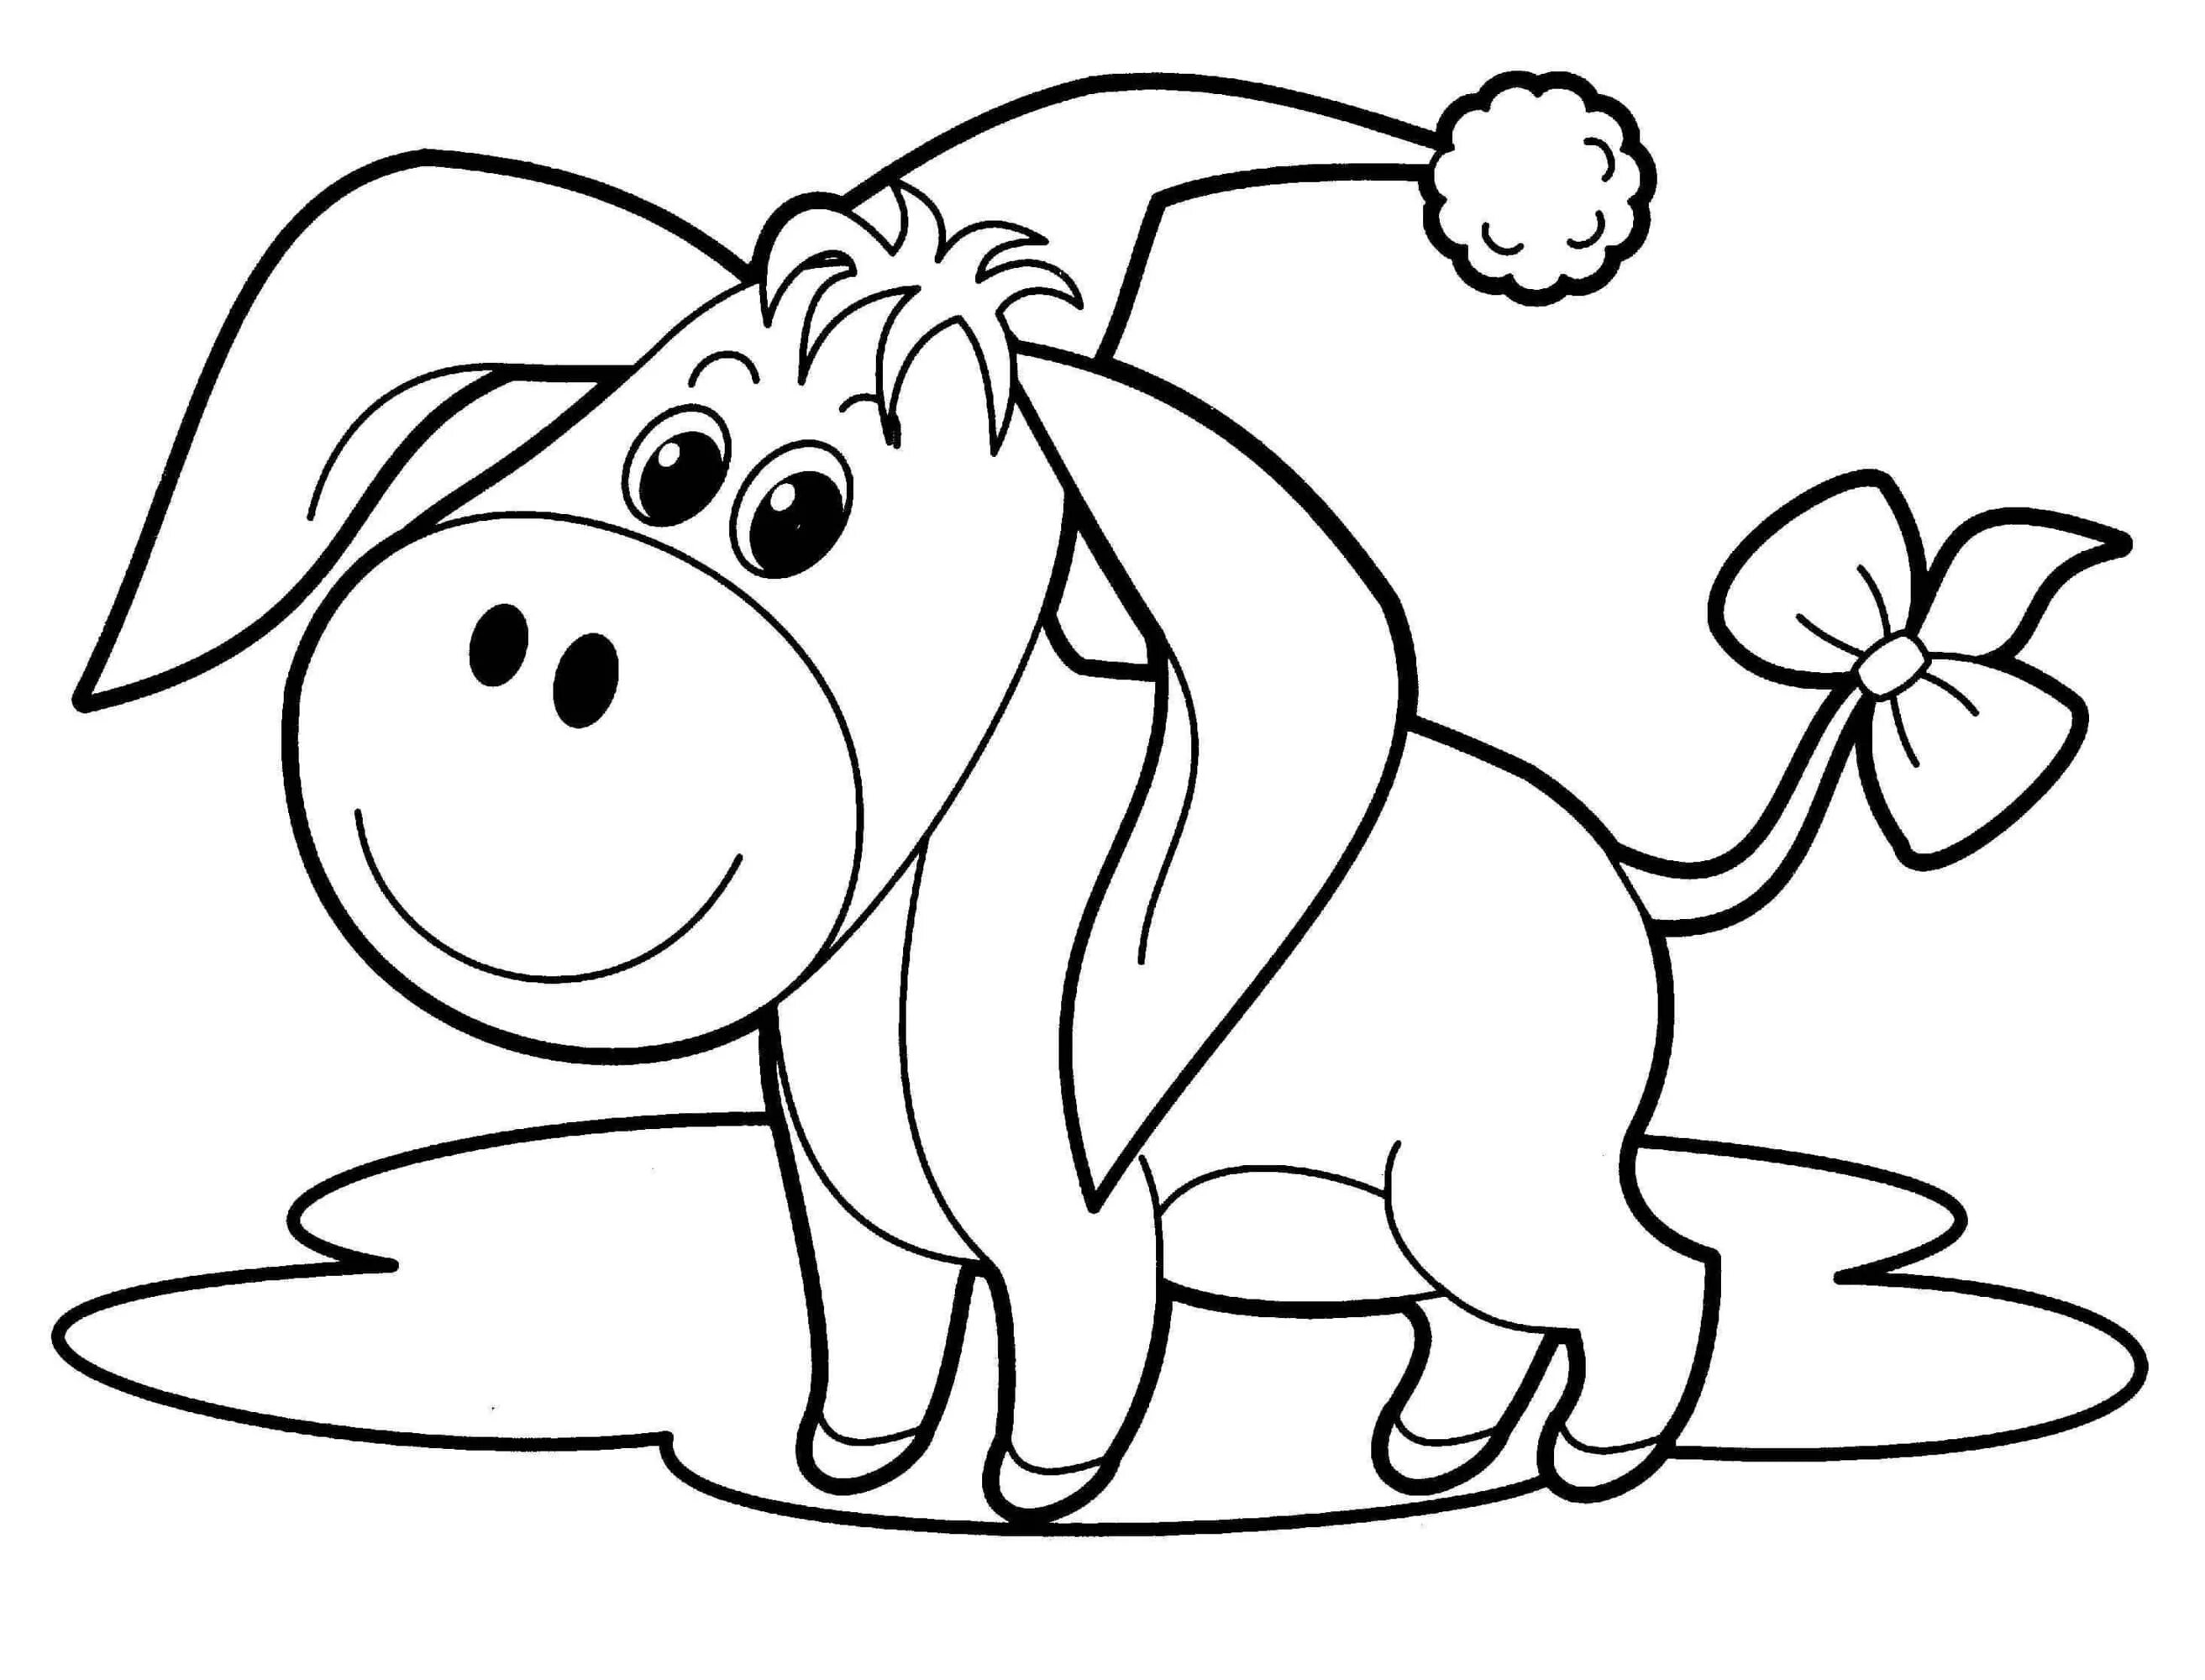 Dazzling coloring pages for kids